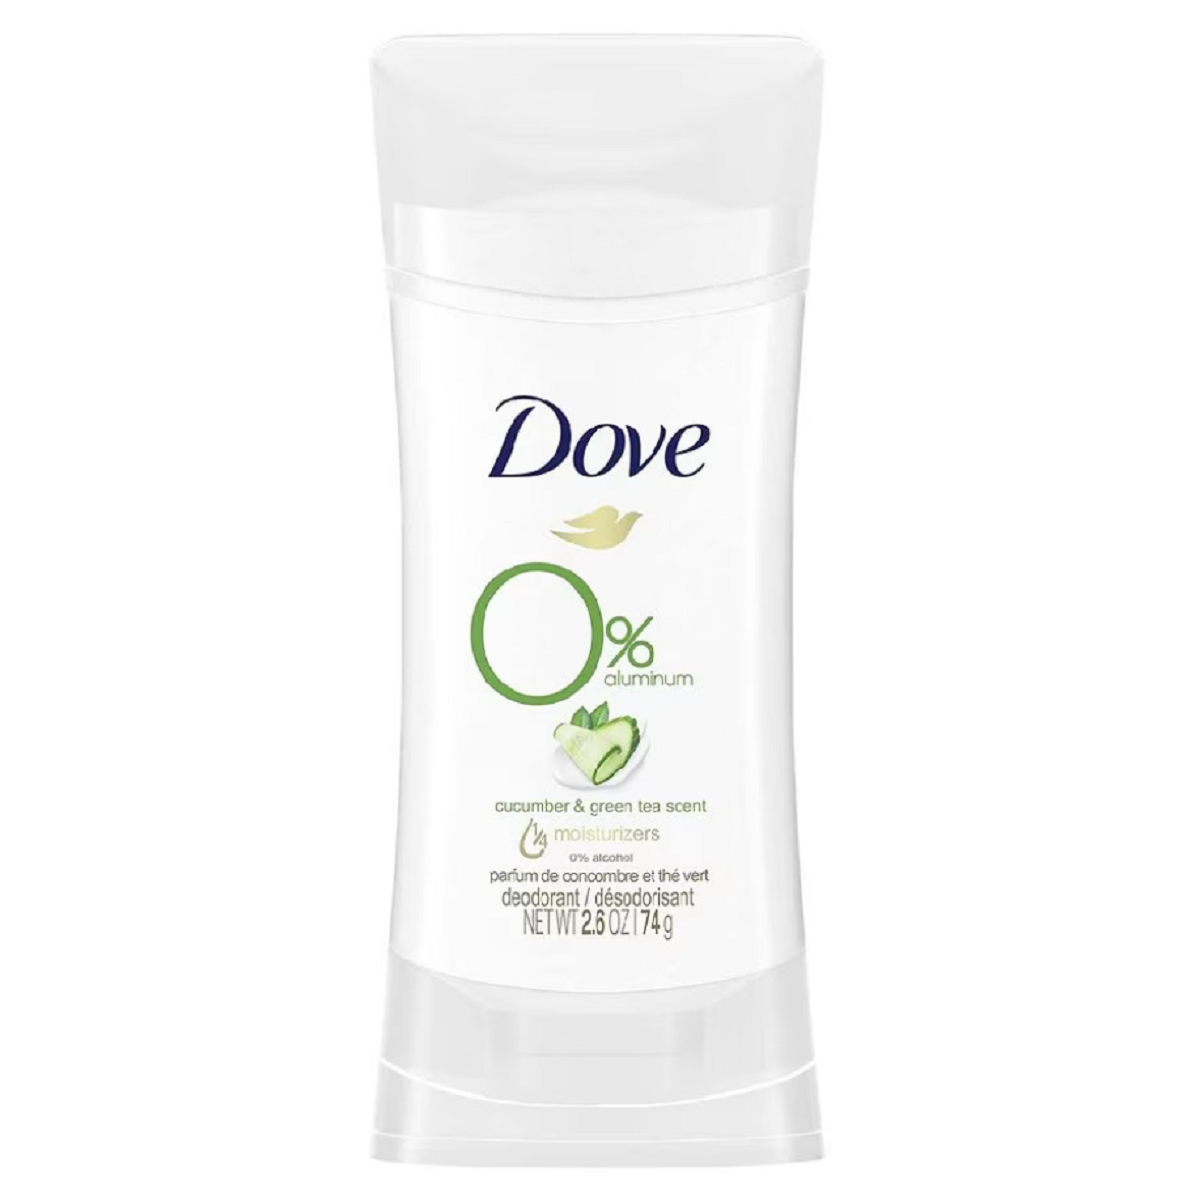 $2 Off Dove Antiperspirant and Deodorant Coupon